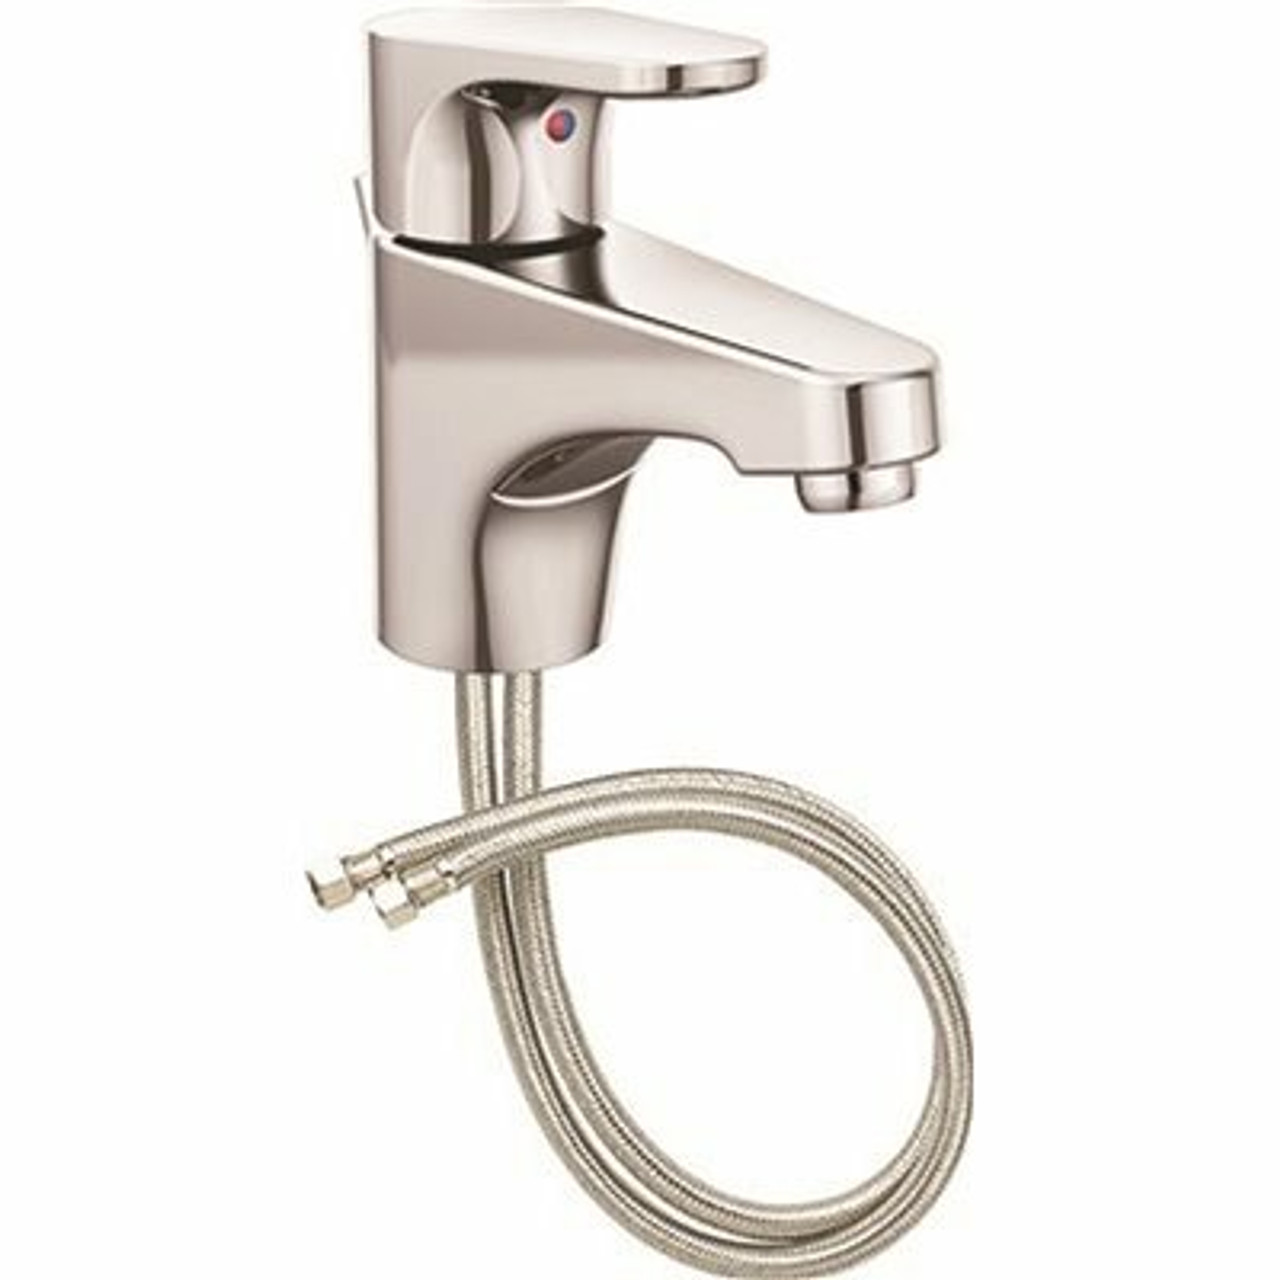 Cleveland Faucet Group Edgestone Single Hole Single-Handle Bathroom Faucet With Drain Assembly In Chrome